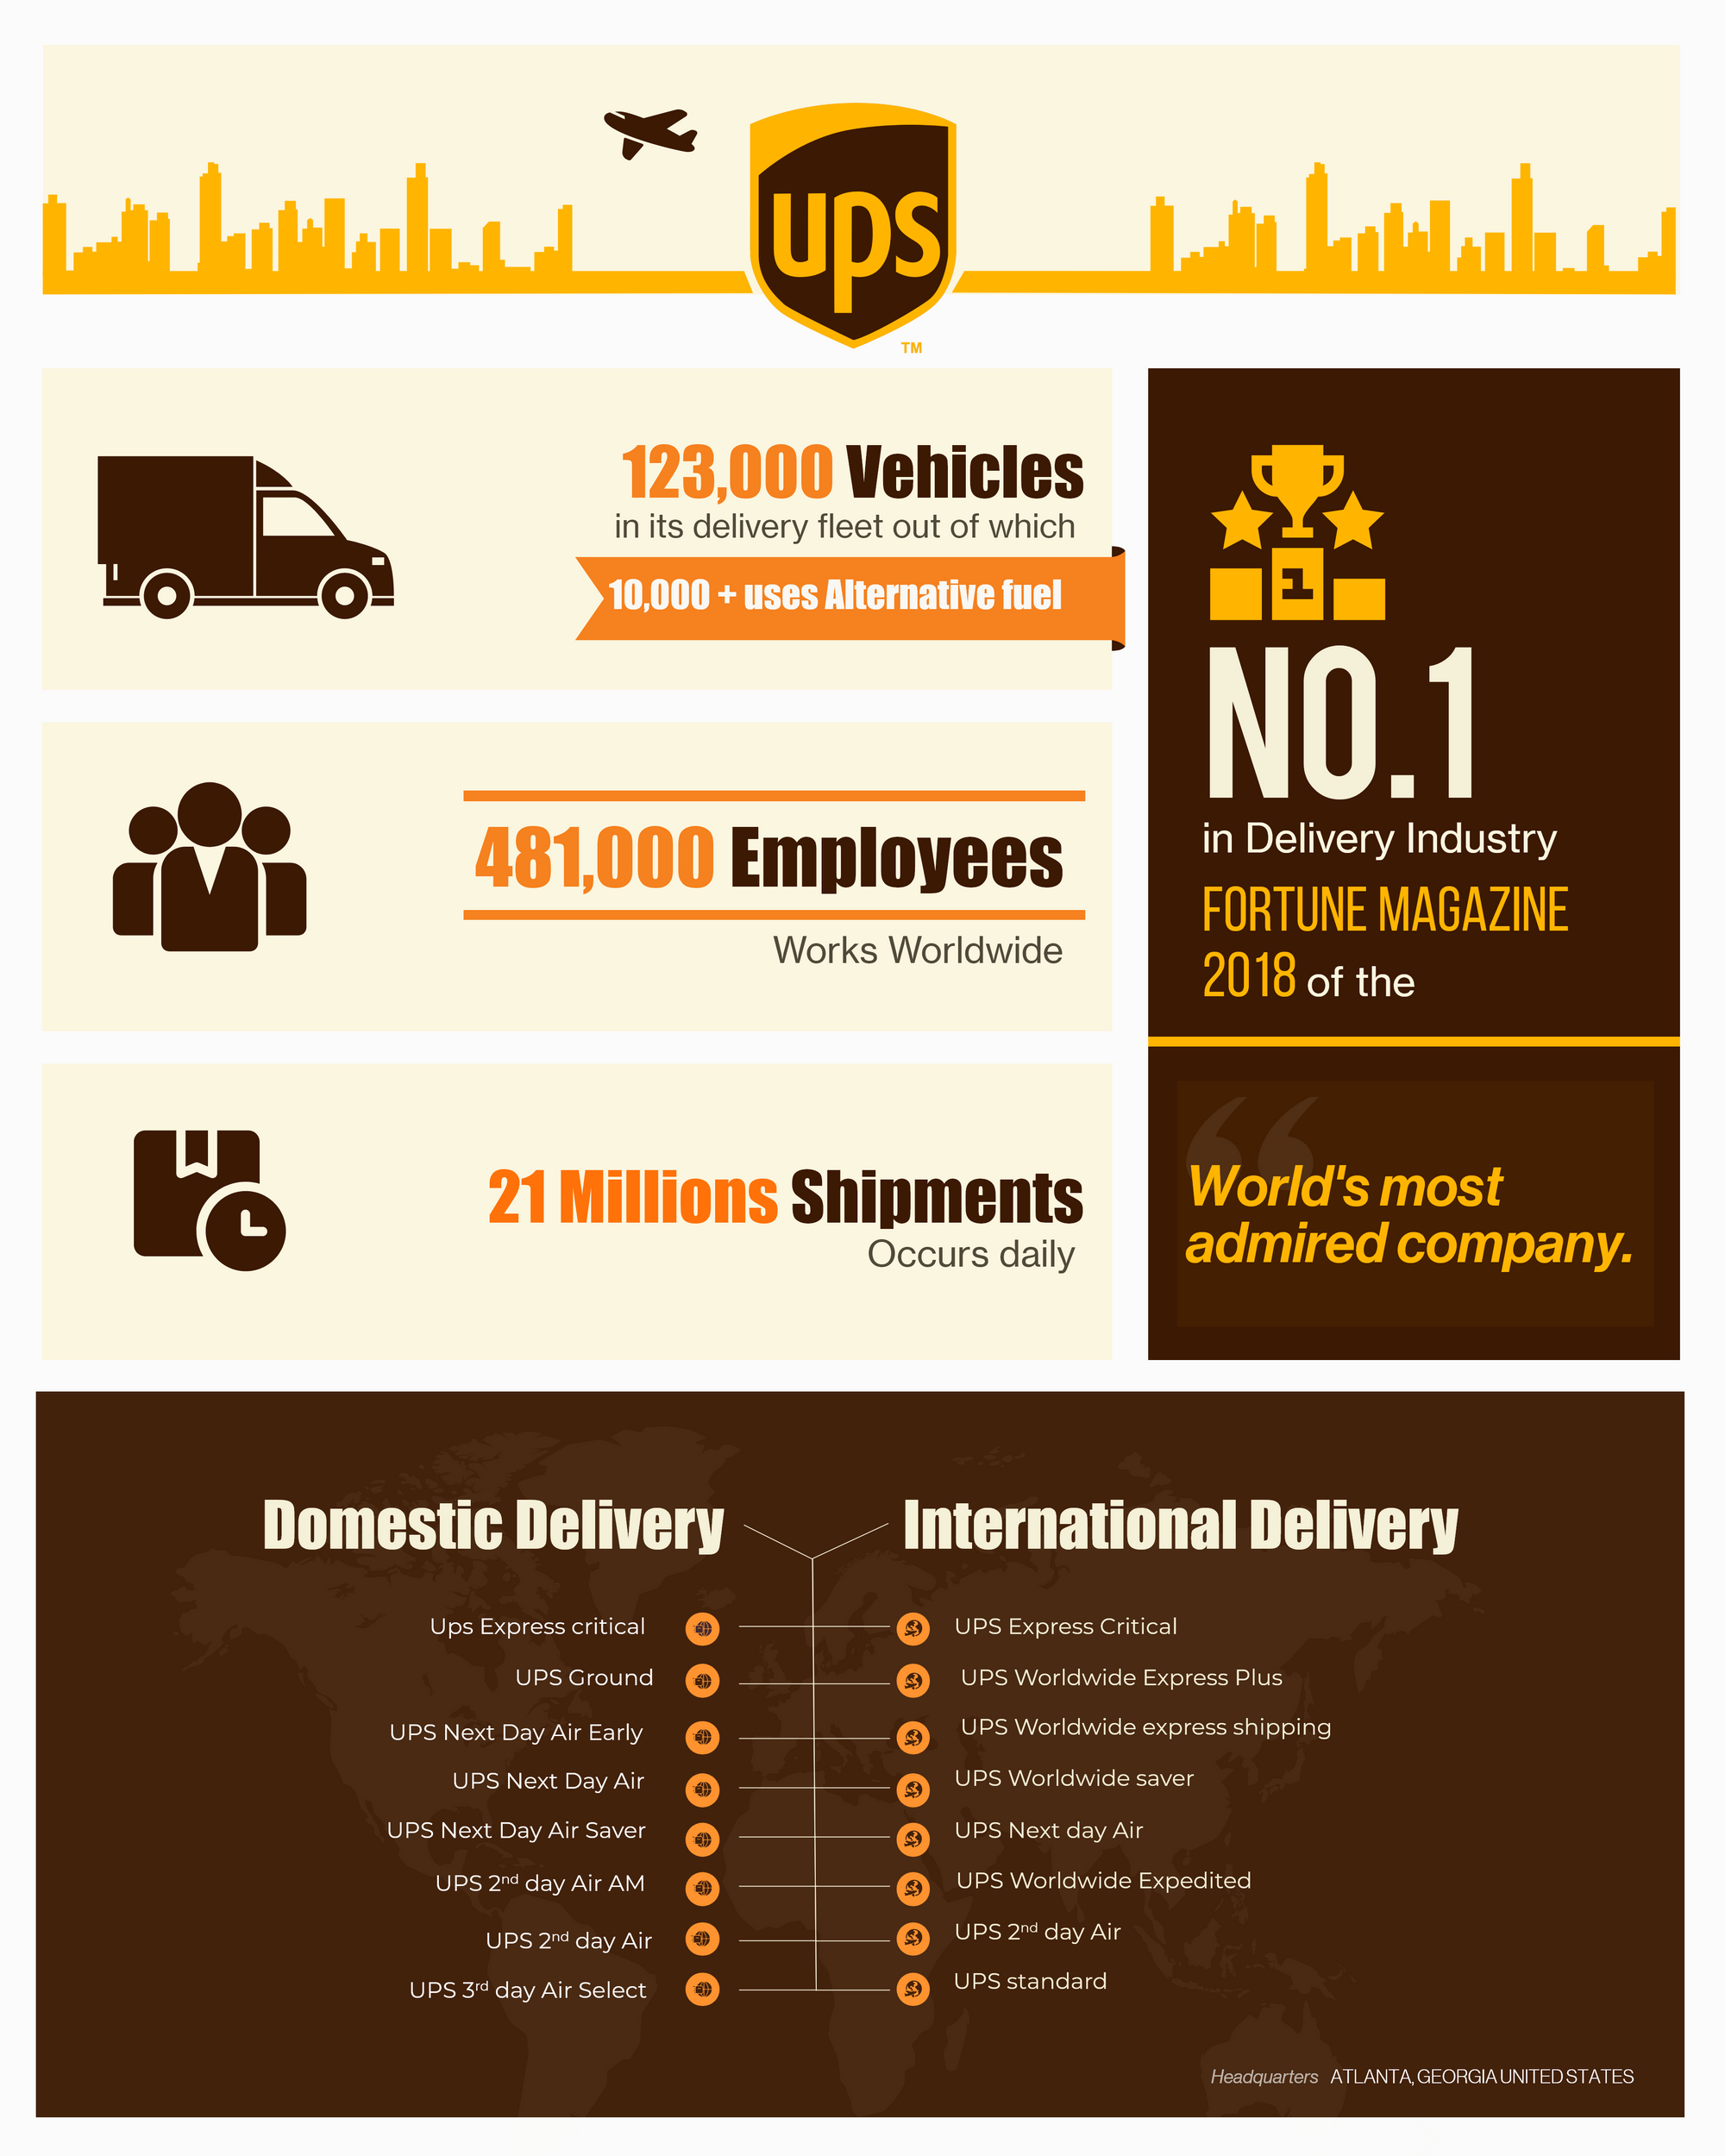 FedEx vs USPS vs UPS vs DHL - Which one should you use?